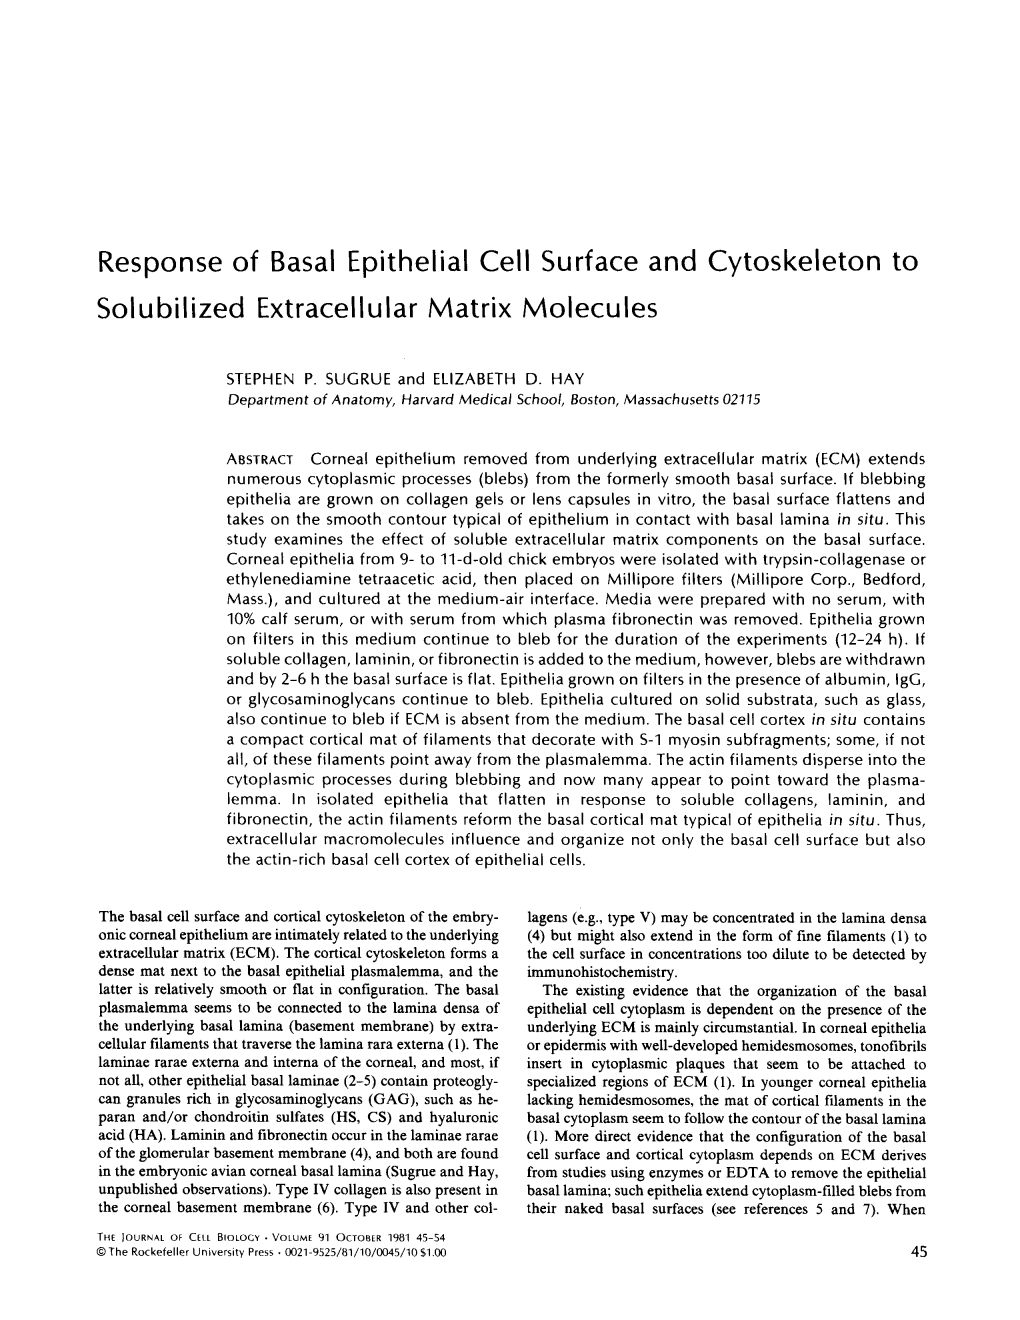 Response of Basal Epithelial Cell Surface and Cytoskeleton to Solubilized Extracellular Matrix Molecules